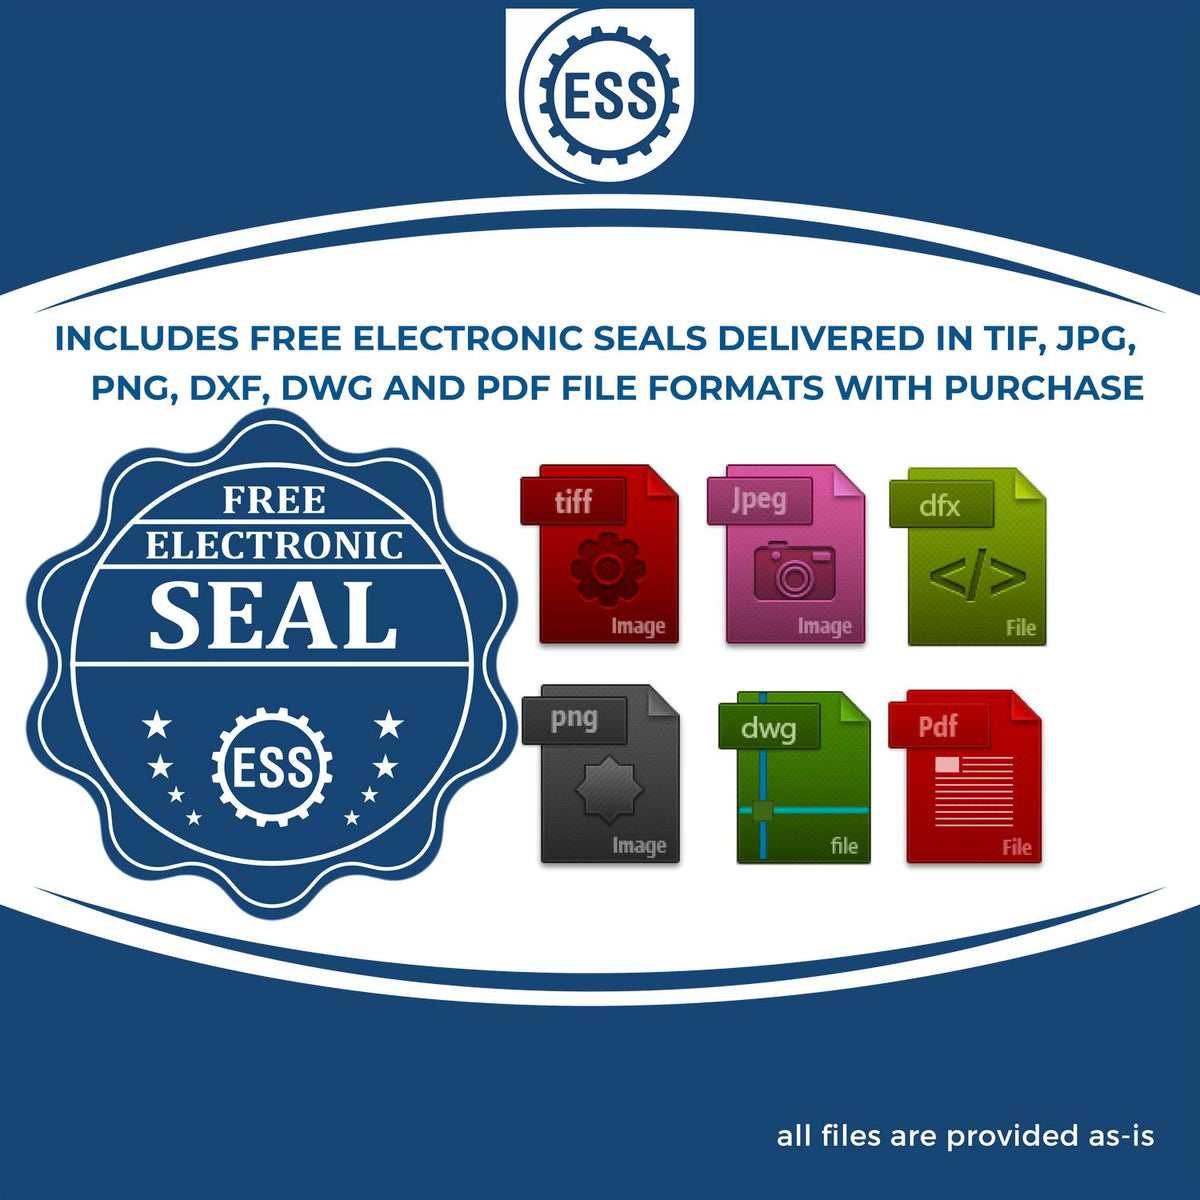 An infographic for the free electronic seal for the Heavy-Duty Kentucky Rectangular Notary Stamp illustrating the different file type icons such as DXF, DWG, TIF, JPG and PNG.